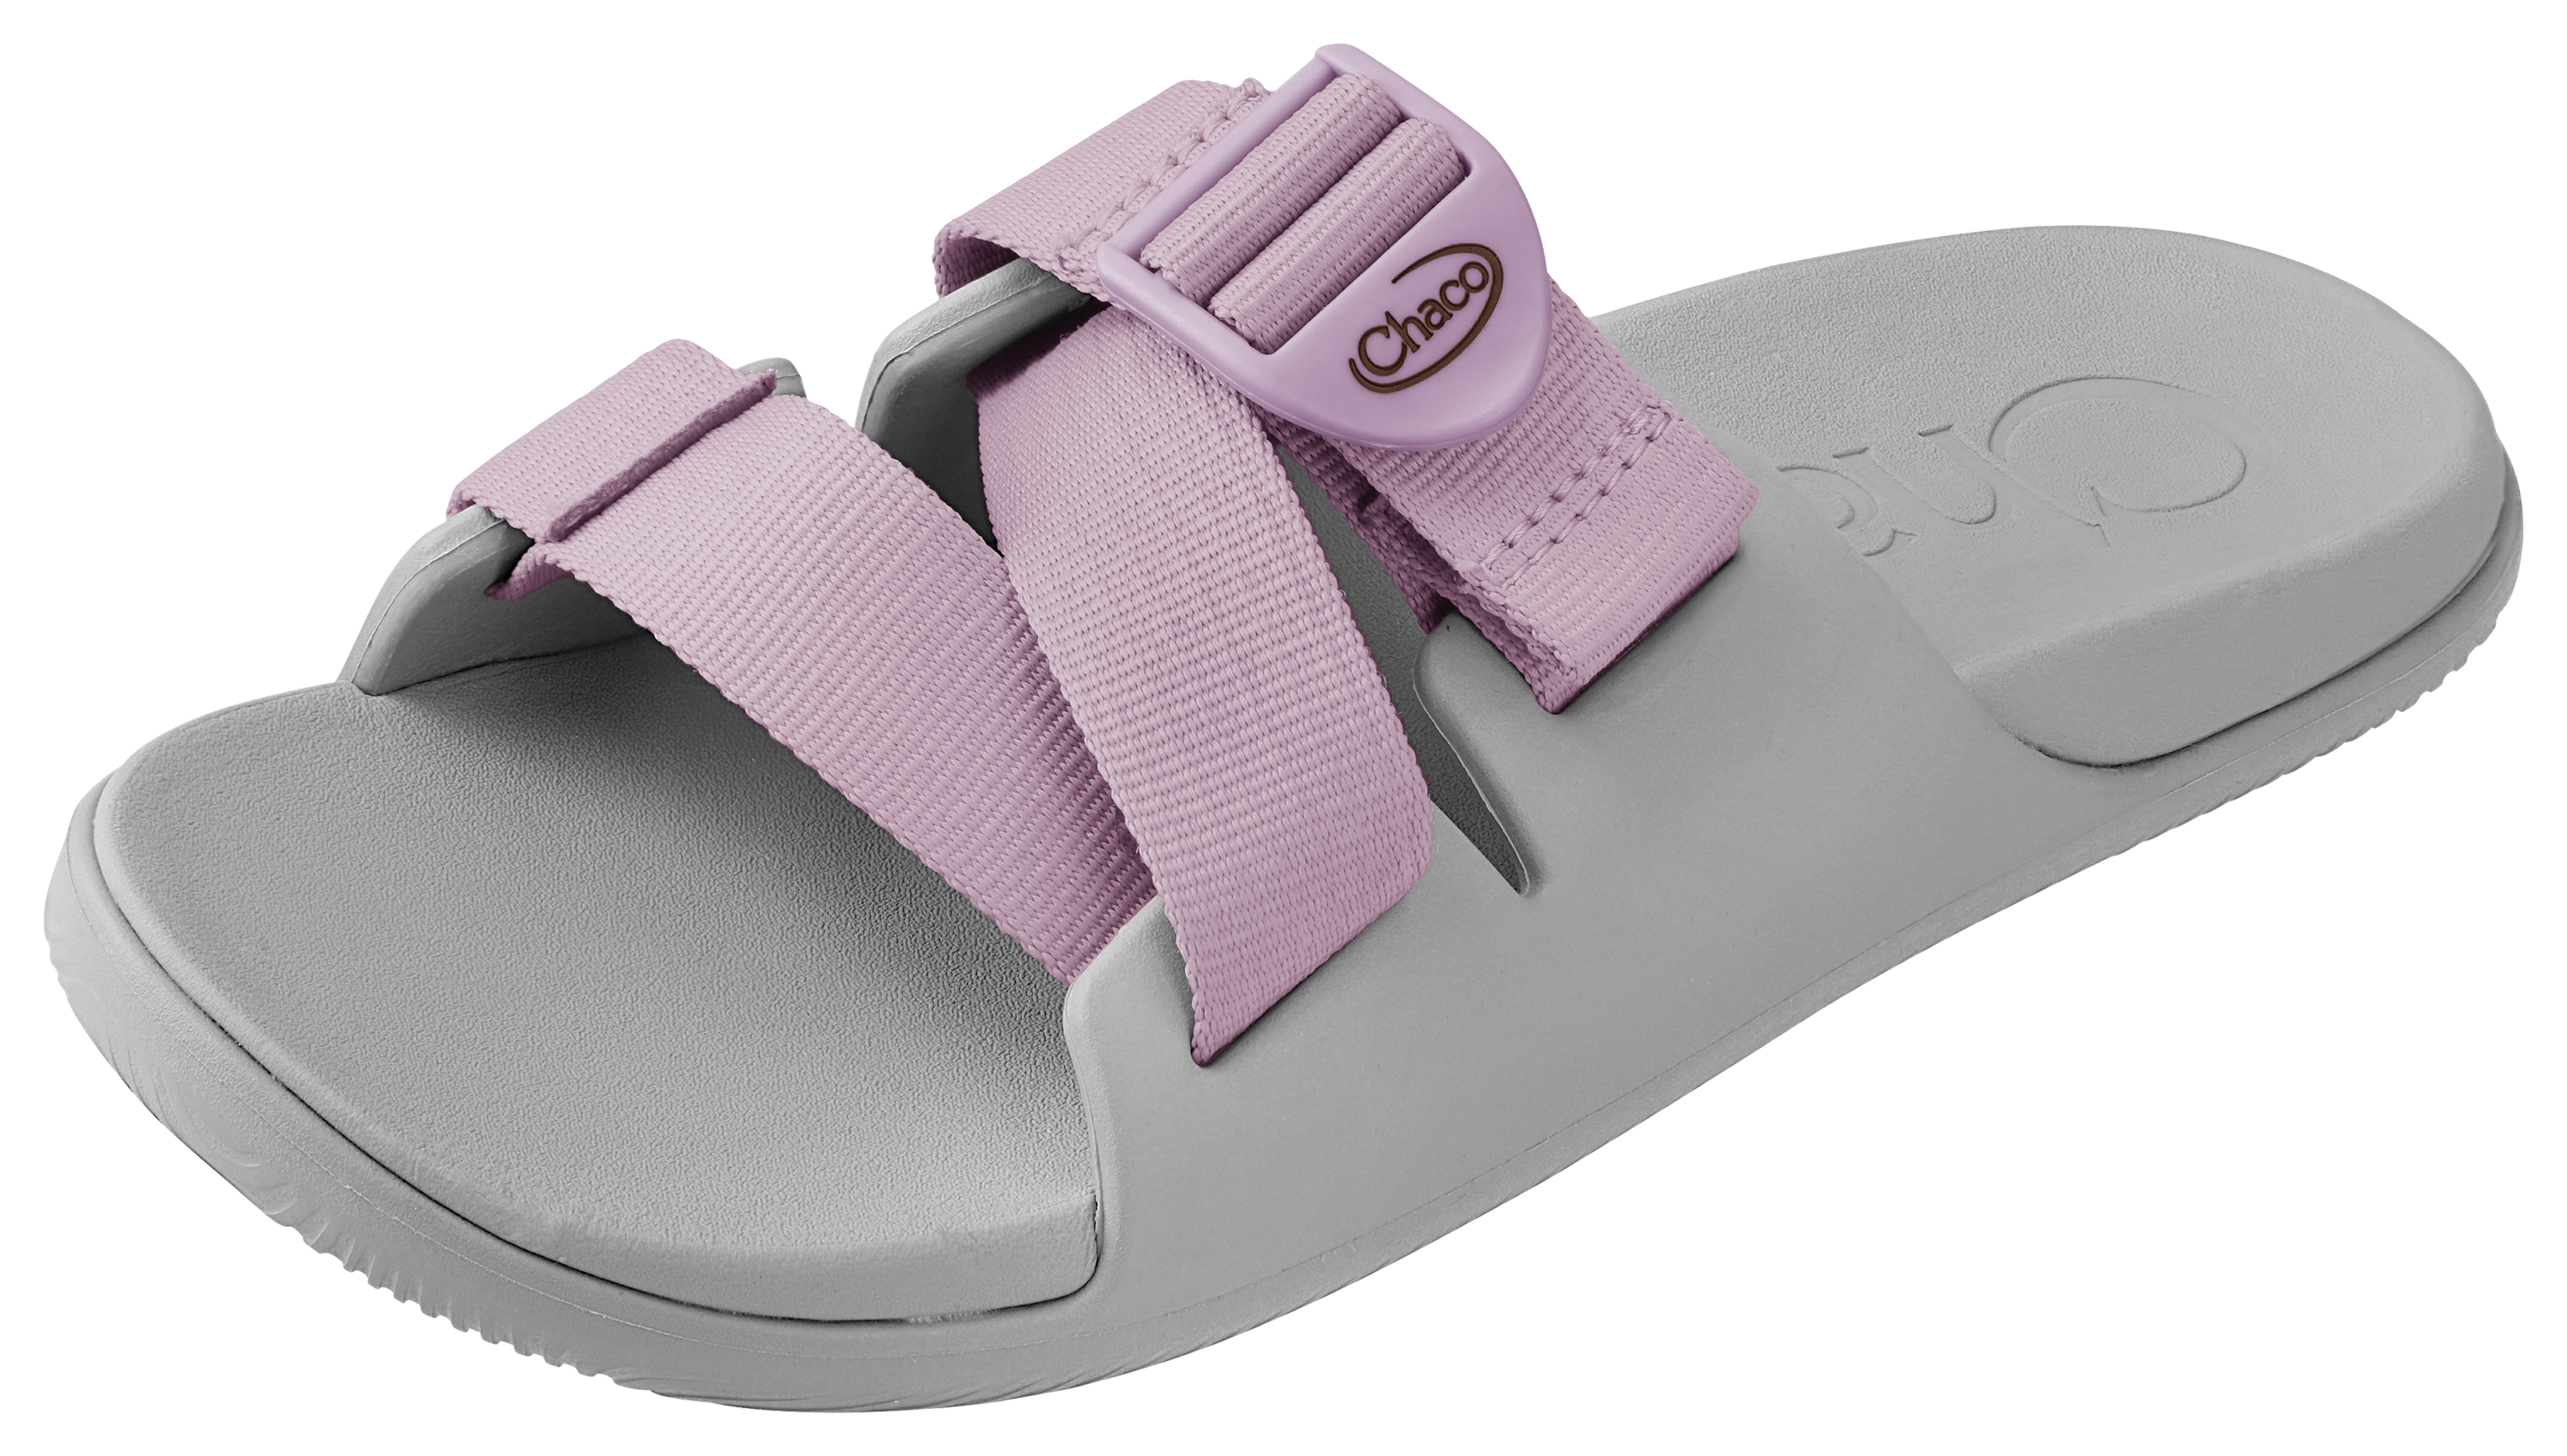 Chaco Chillos Slide Sandals for Ladies Lavender 7M